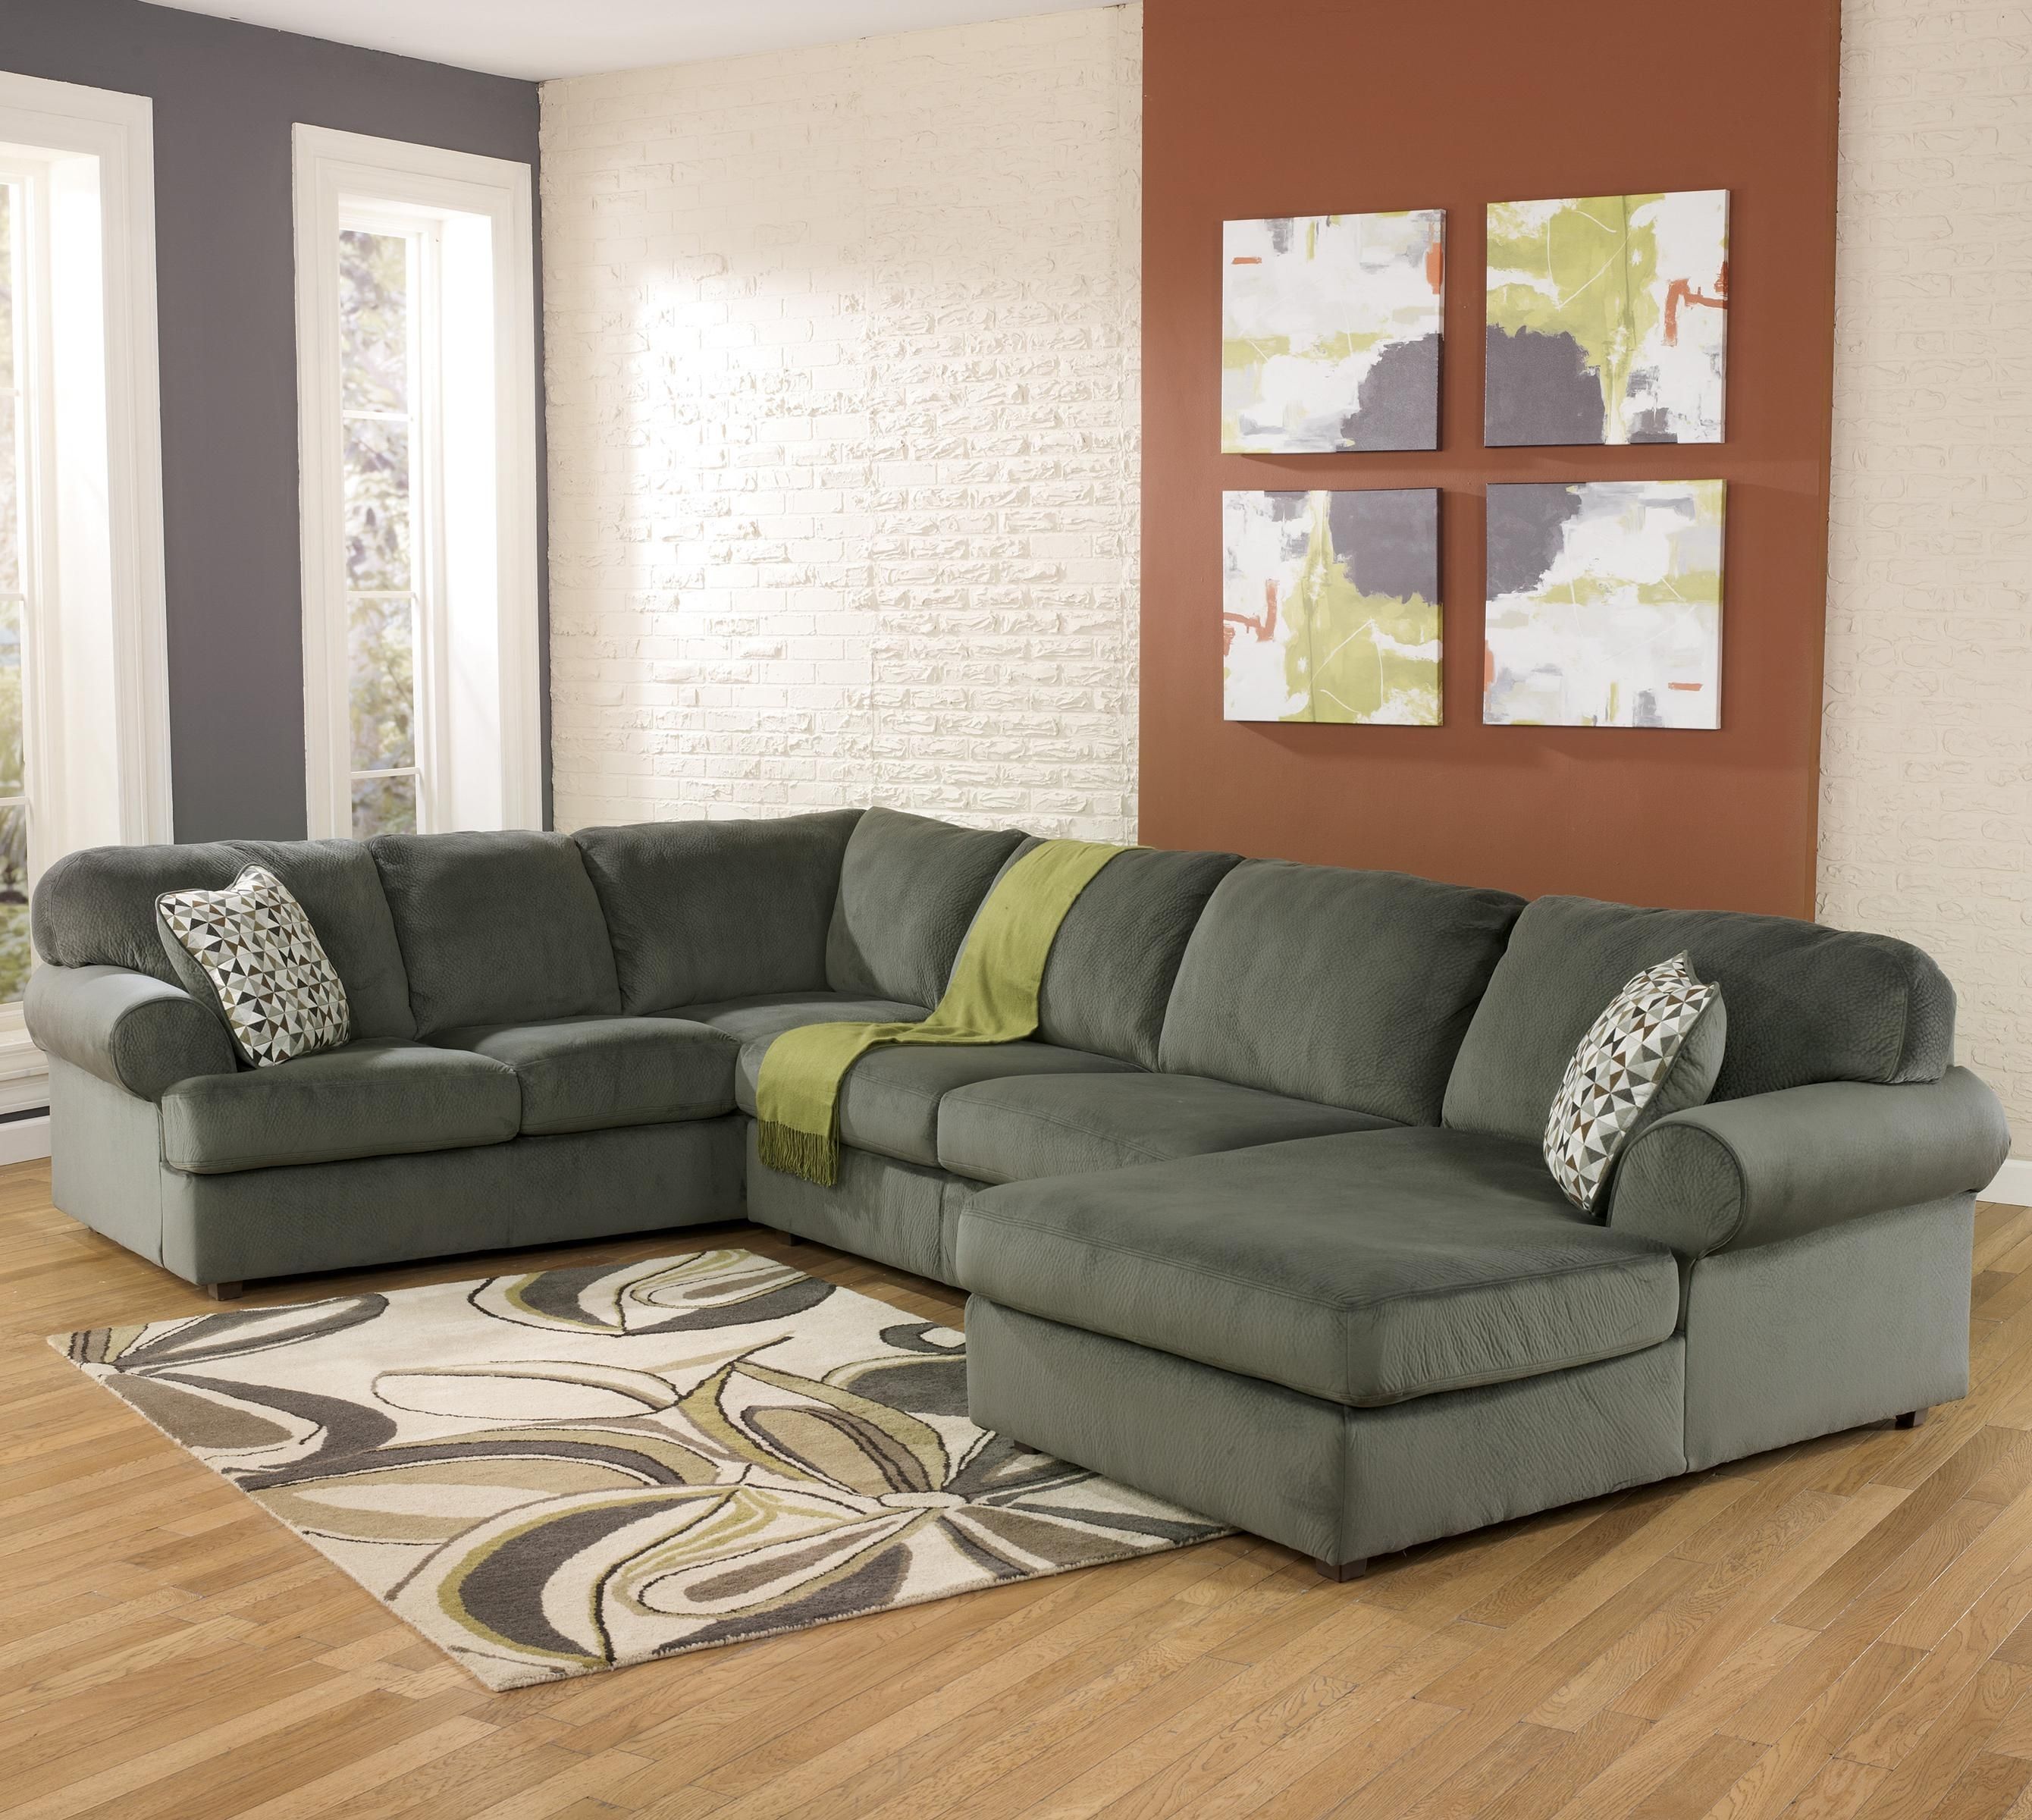 Casual Sectional Sofa With Right Chaisesignature Design Pertaining To Harrisburg Pa Sectional Sofas (View 1 of 10)